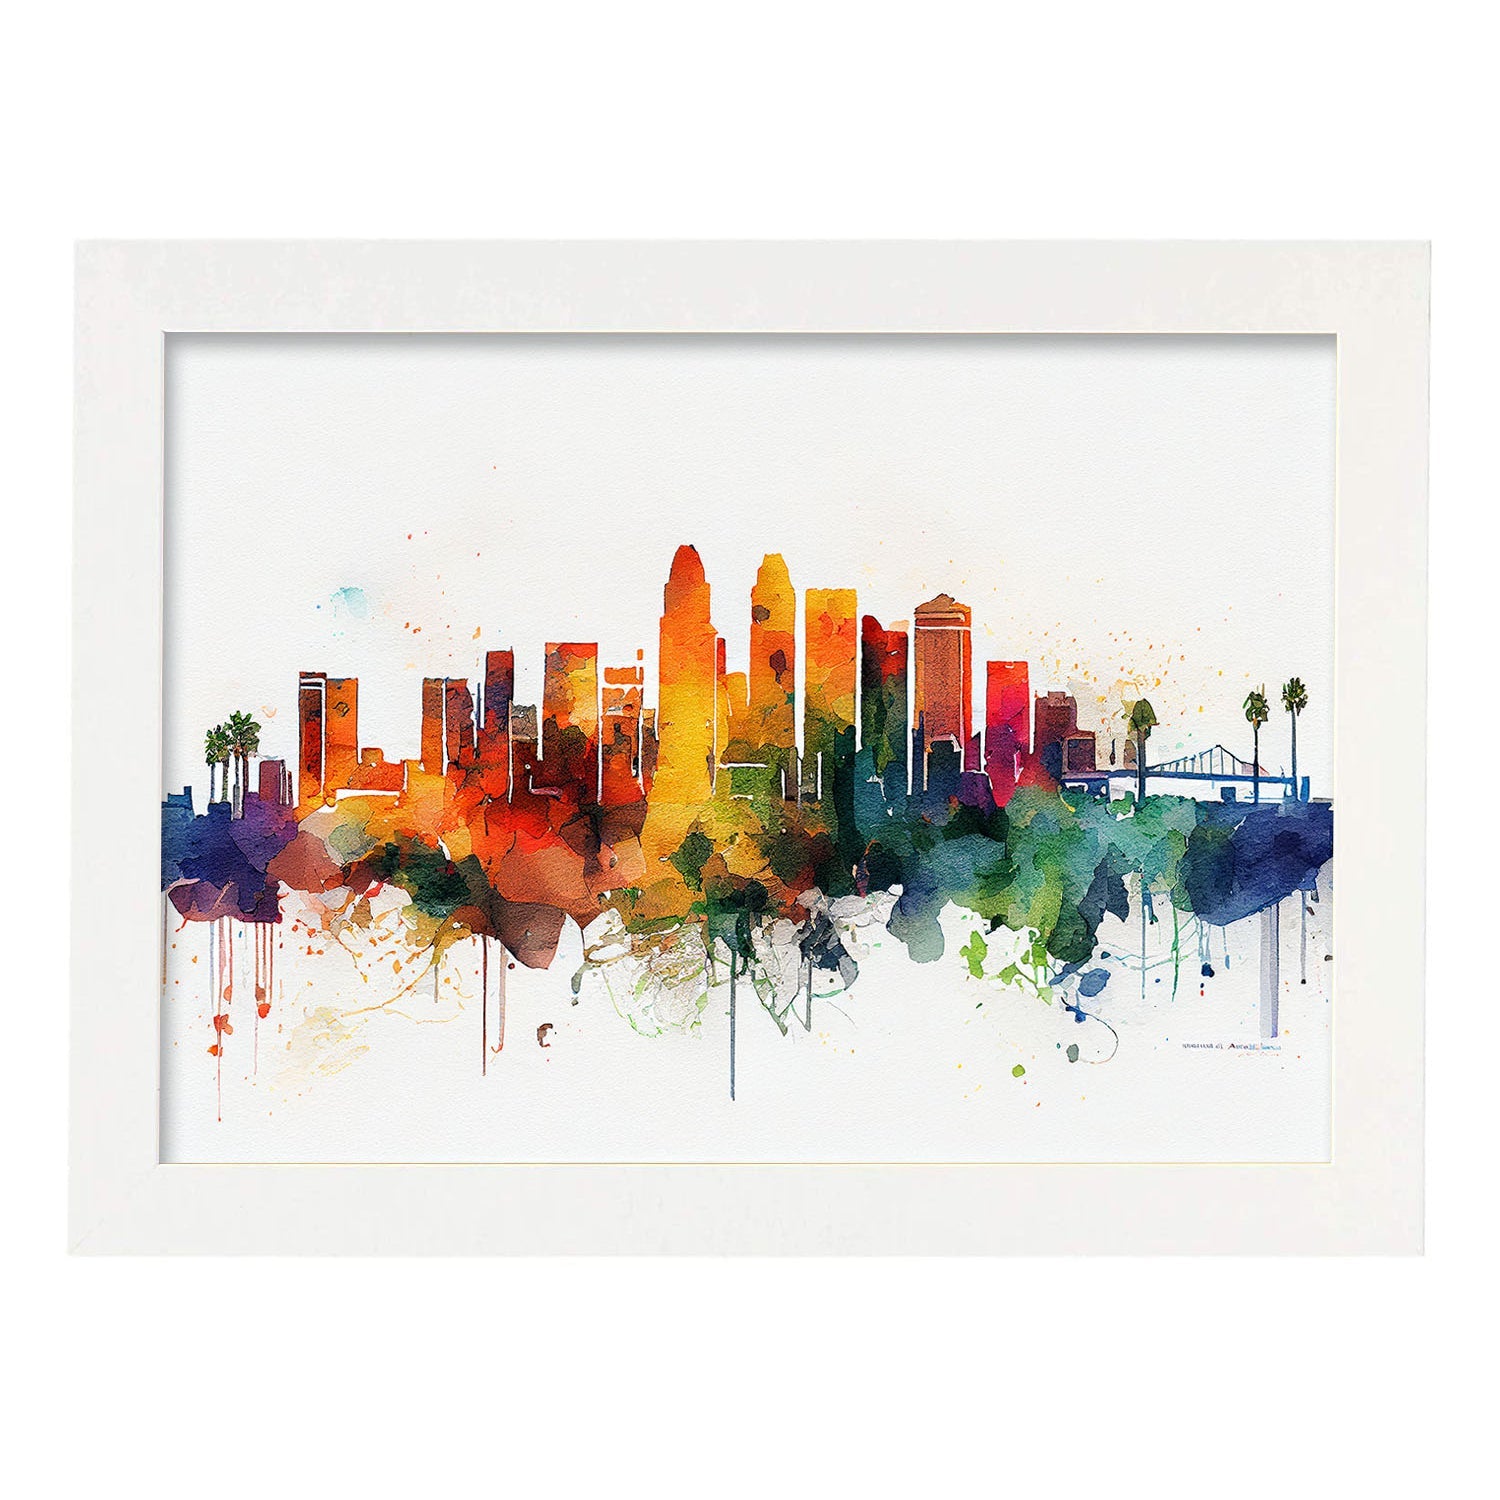 Nacnic watercolor of a skyline of the city of Los Angeles_2. Aesthetic Wall Art Prints for Bedroom or Living Room Design.-Artwork-Nacnic-A4-Marco Blanco-Nacnic Estudio SL